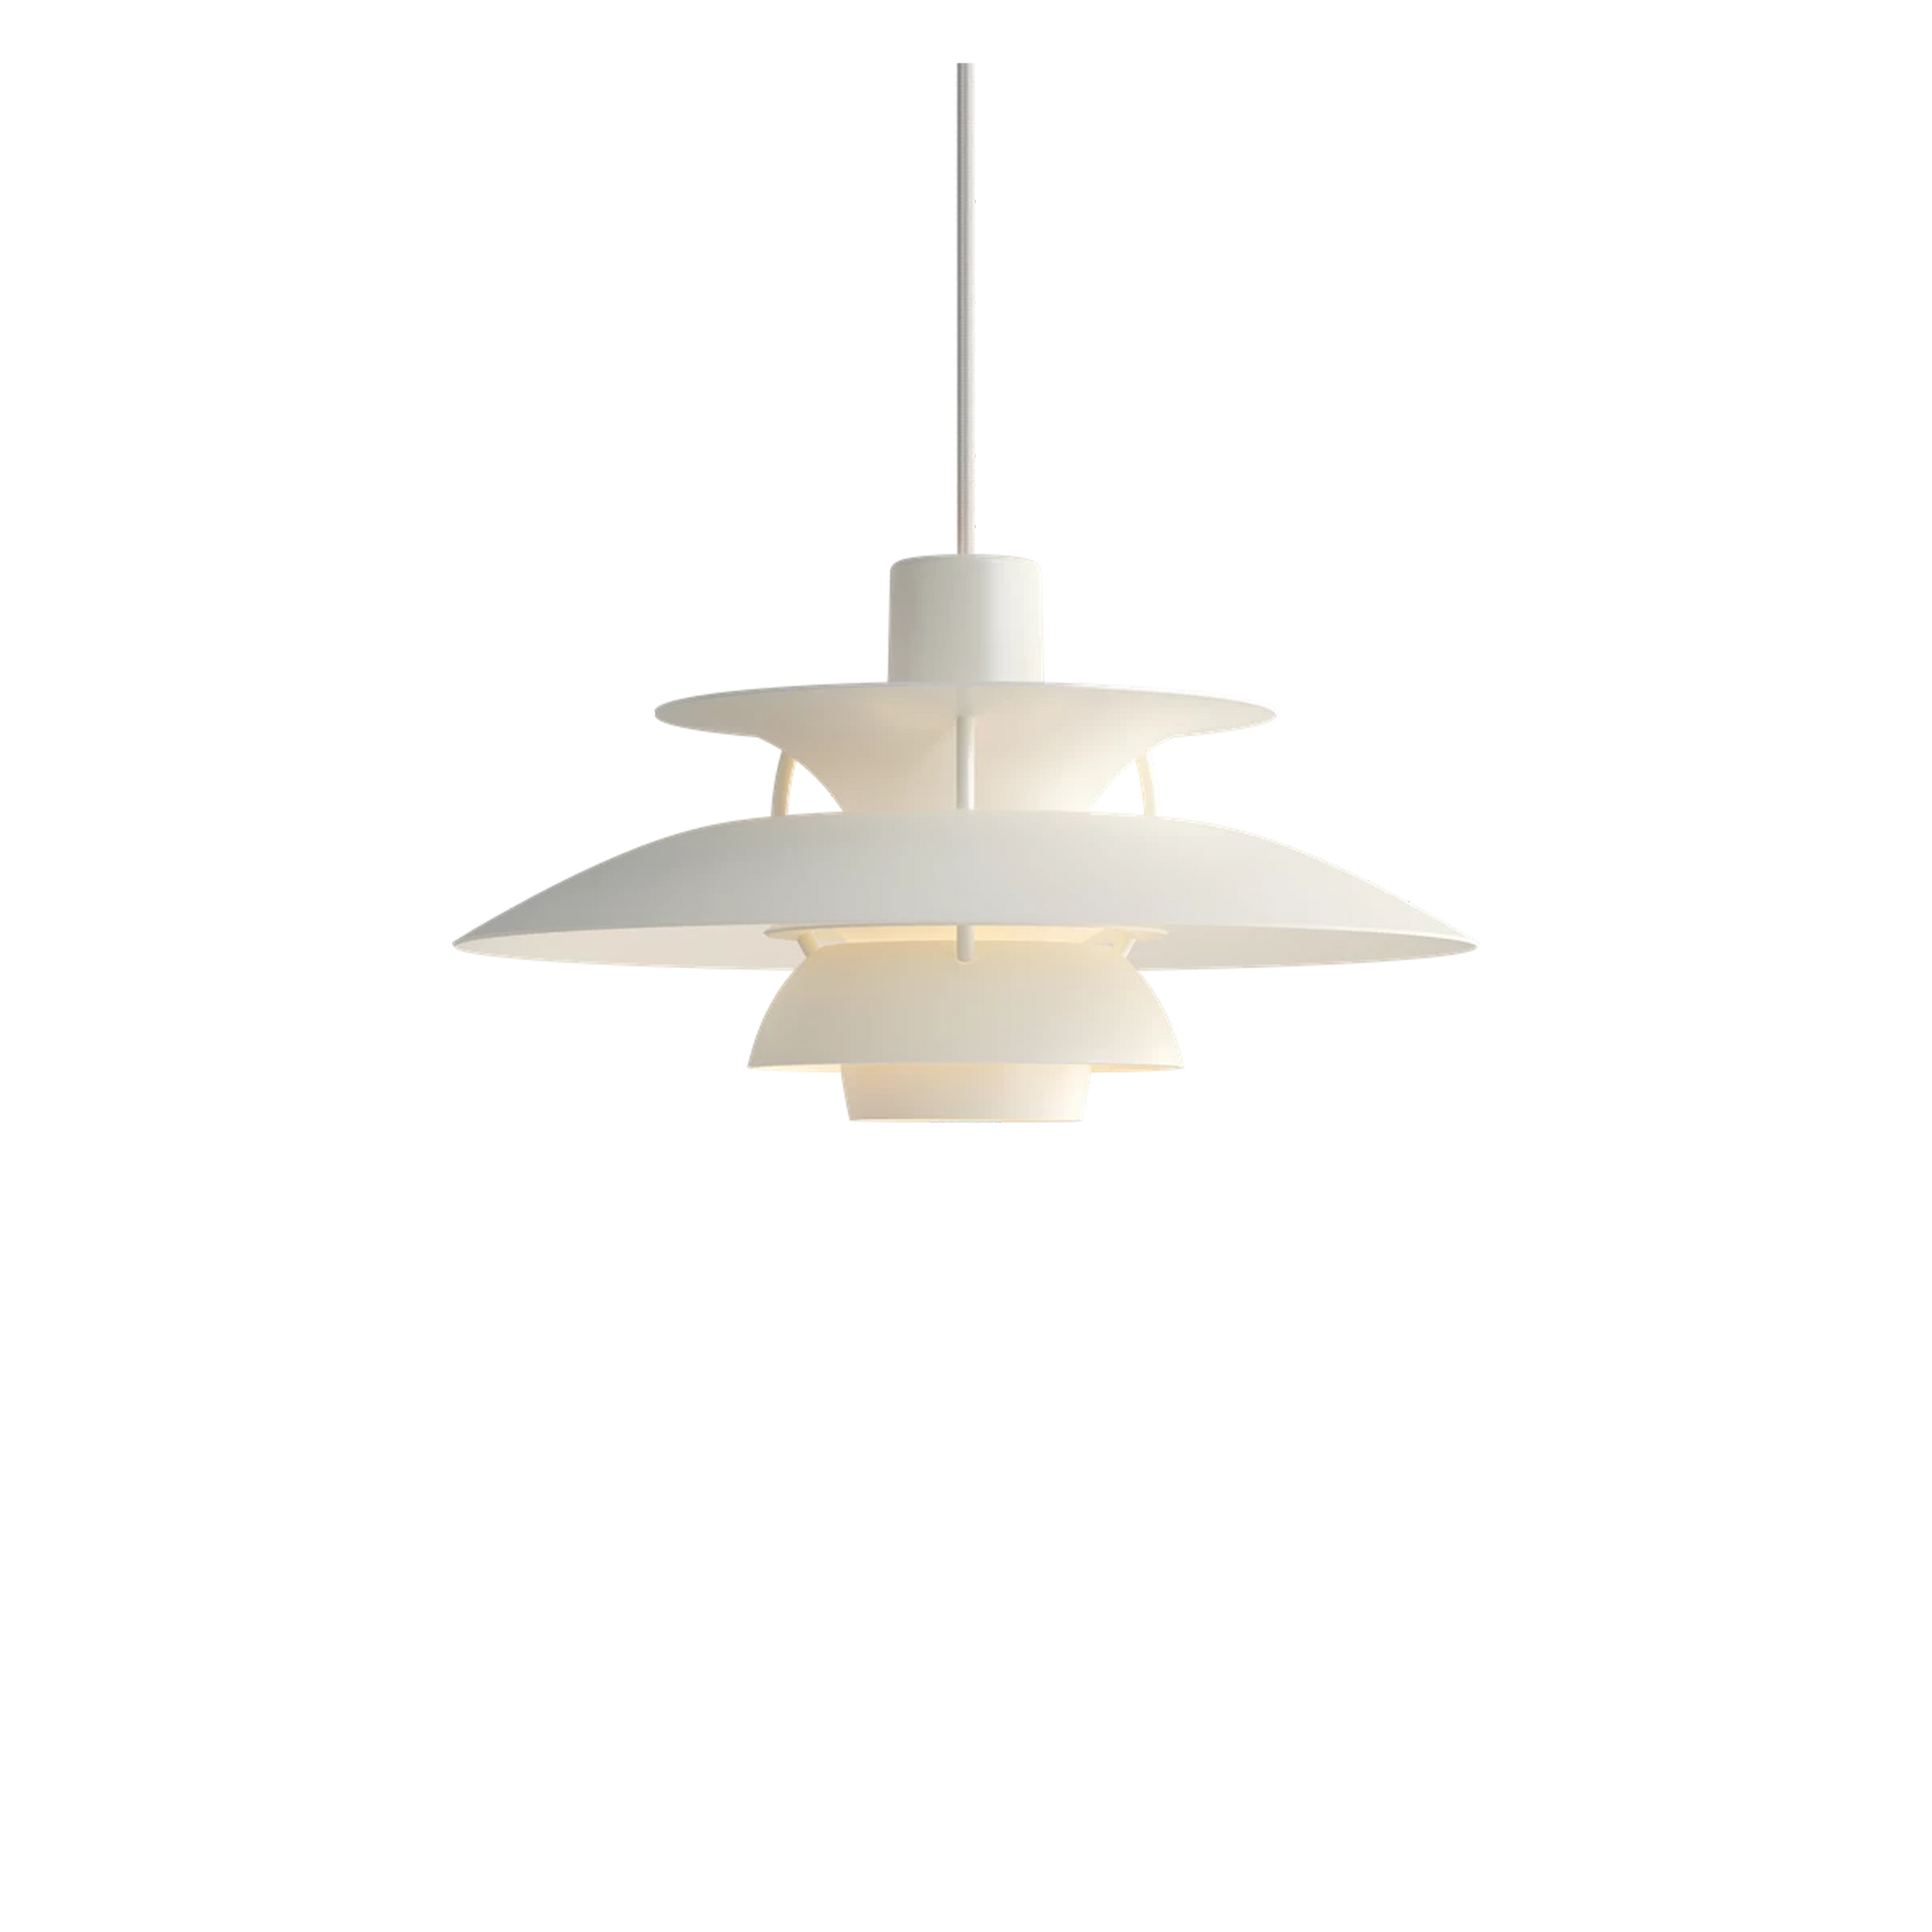 A beautiful sculptural element both when it is on and off, the PH 5 Mini Pendant is a much-loved and well-known fixture design found in many spaces around the world.